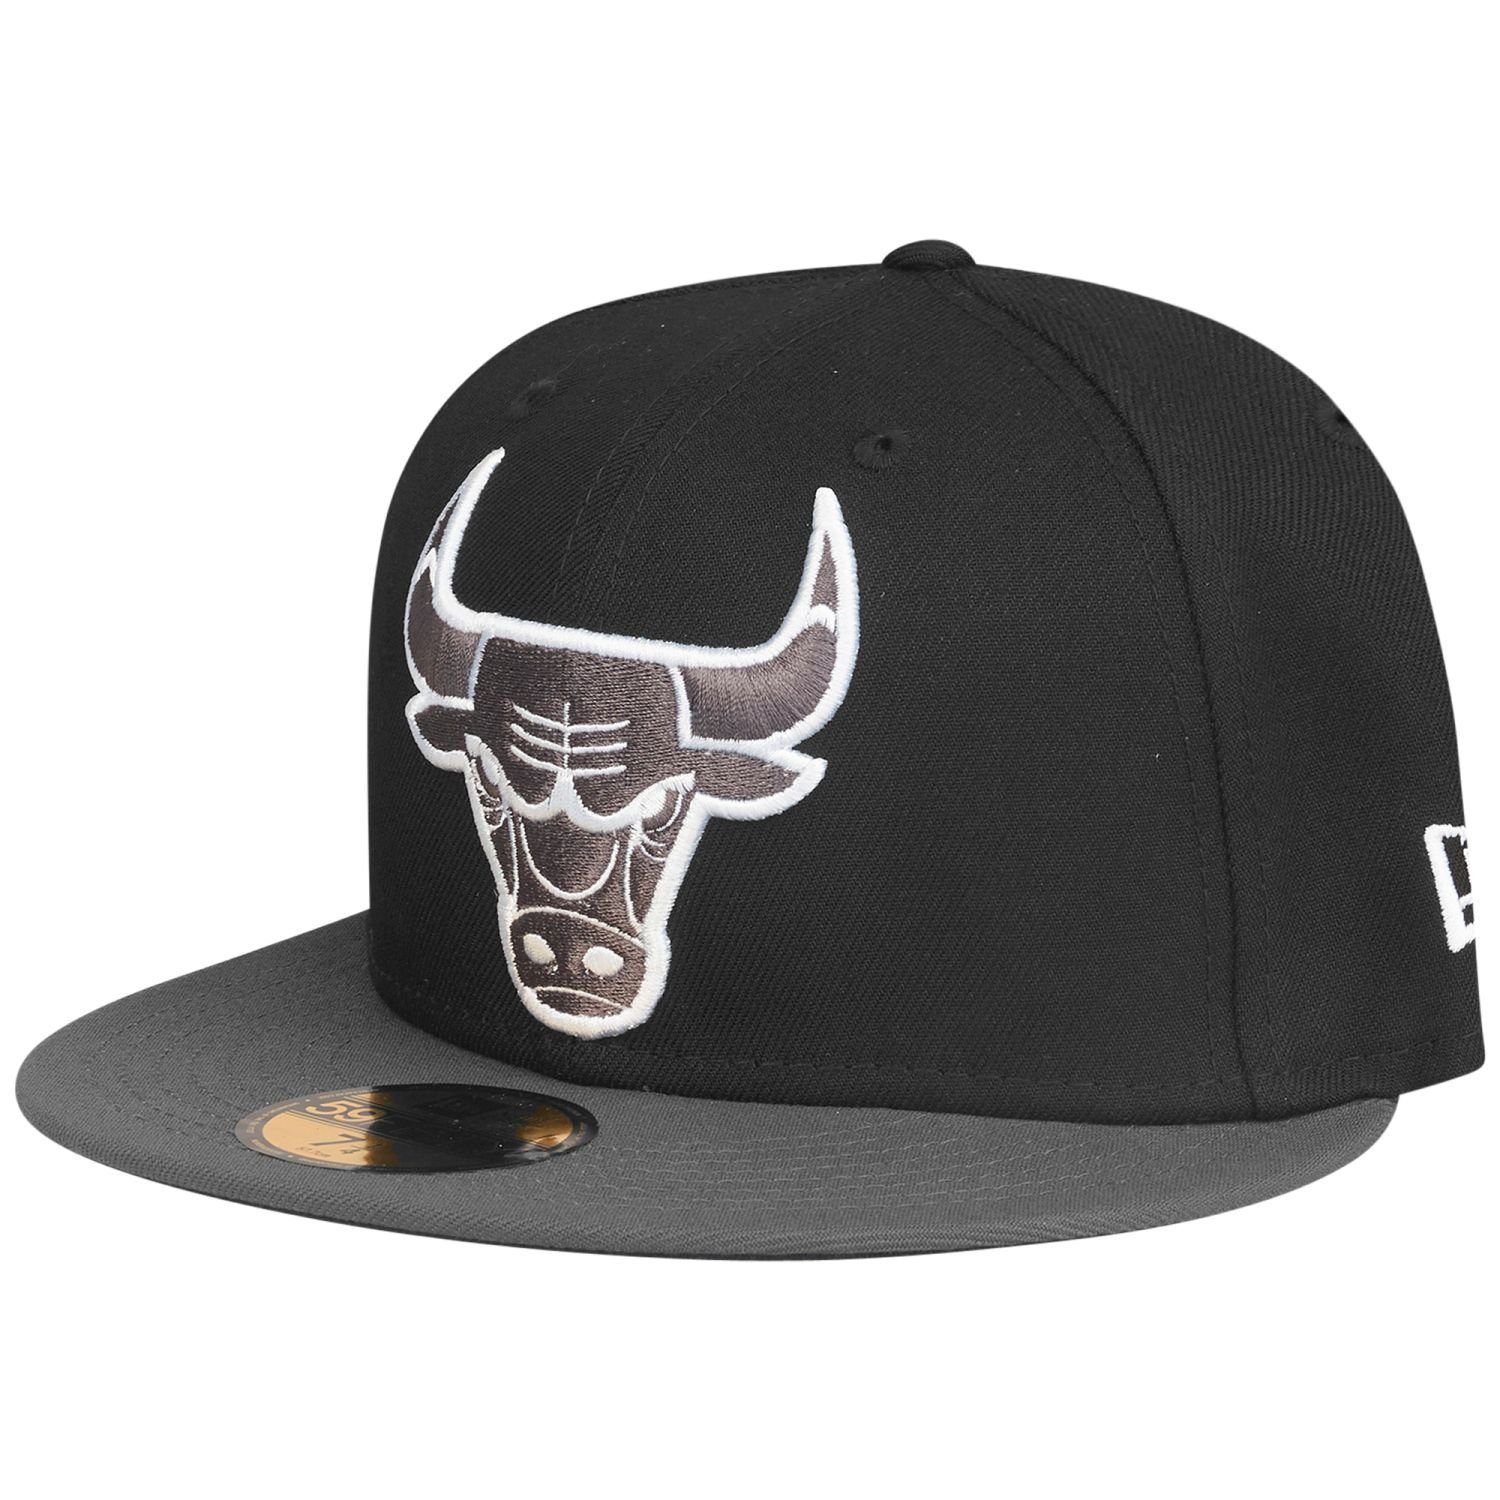 New Era Fitted Cap 59Fifty LOGO Chicago Bulls